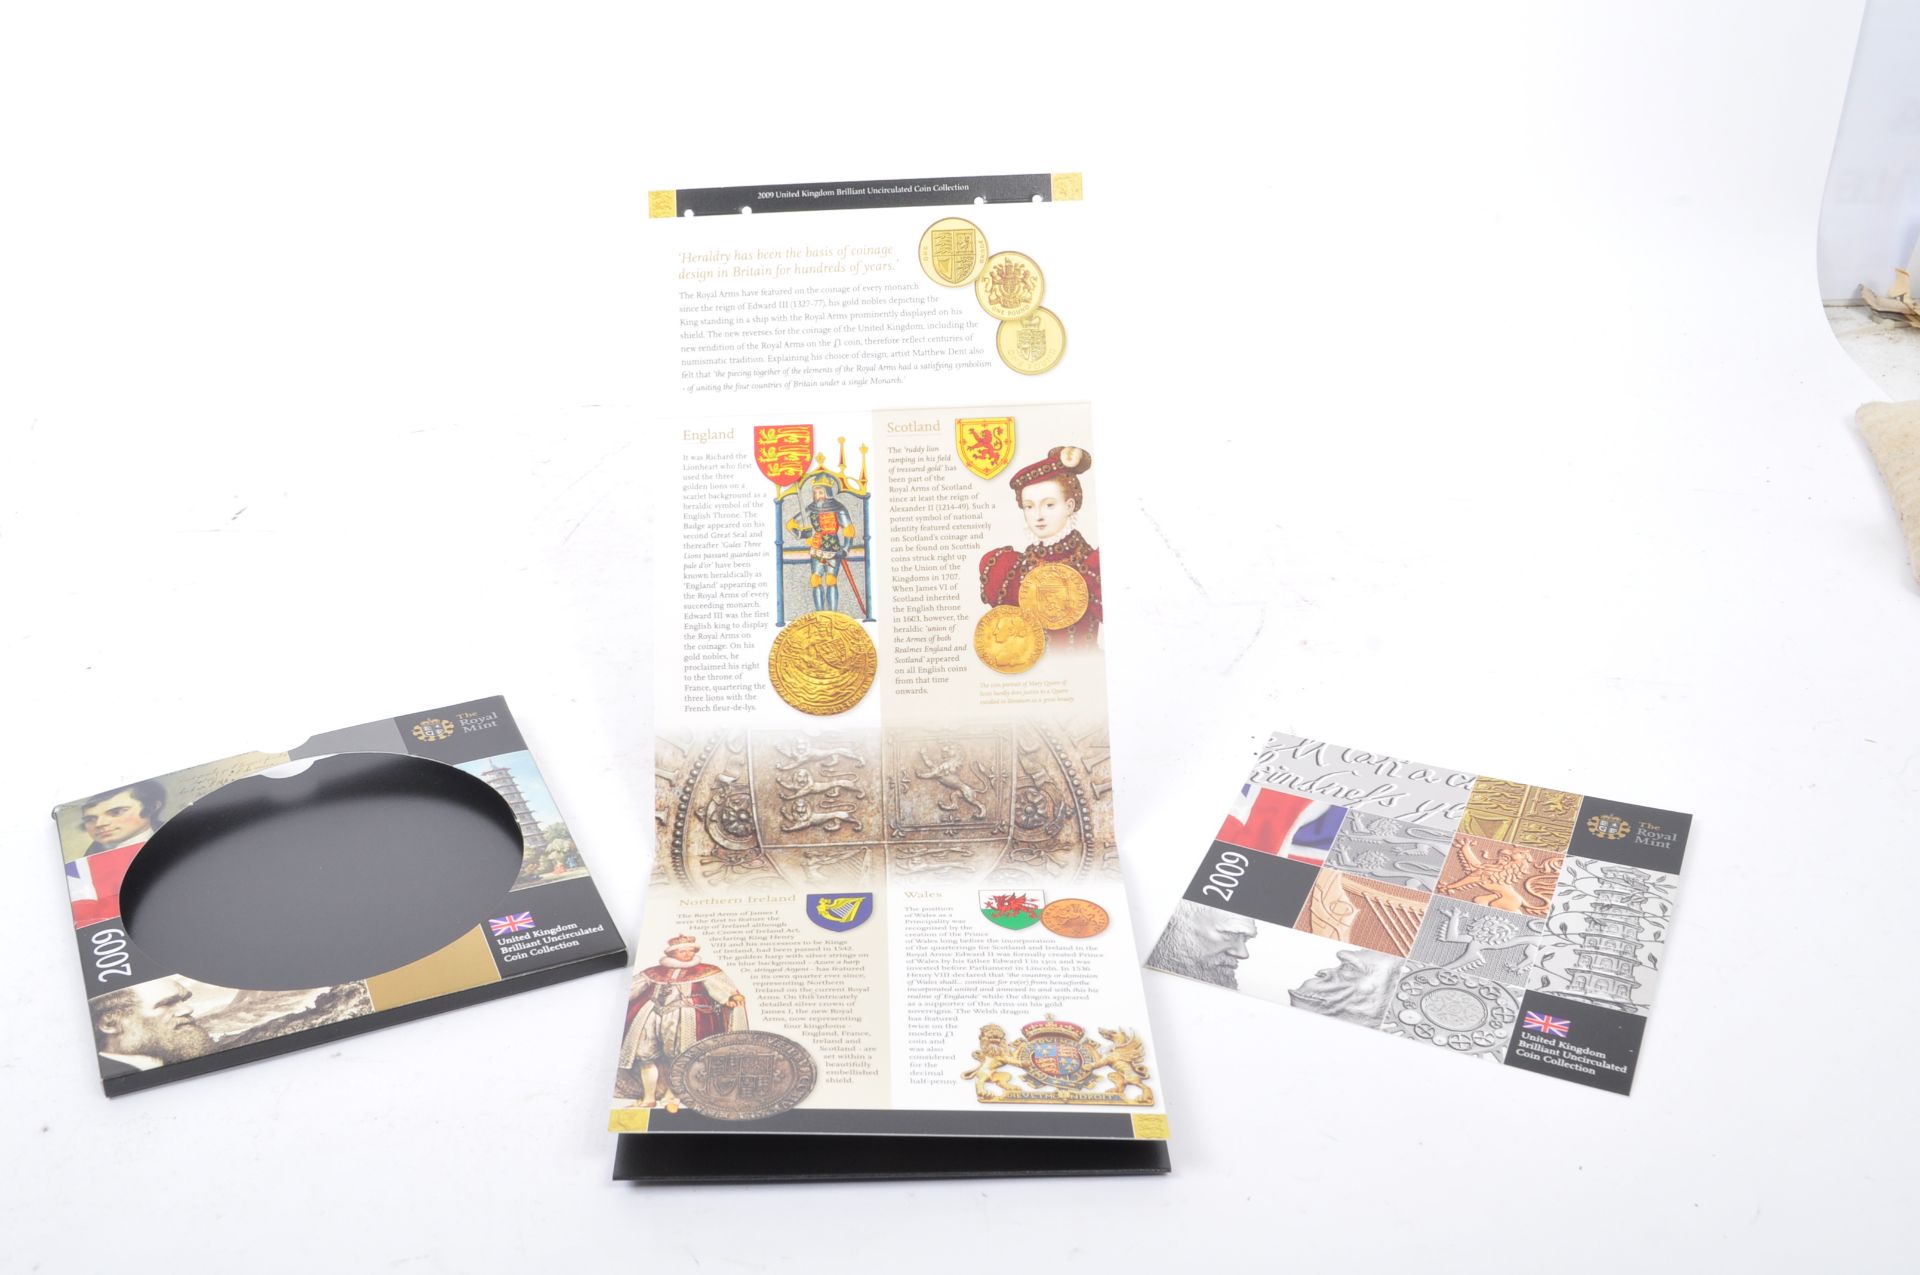 2009 ROYAL MINT UK BRILLIANT UNCIRCULATED COIN COLLECTION - Image 2 of 4